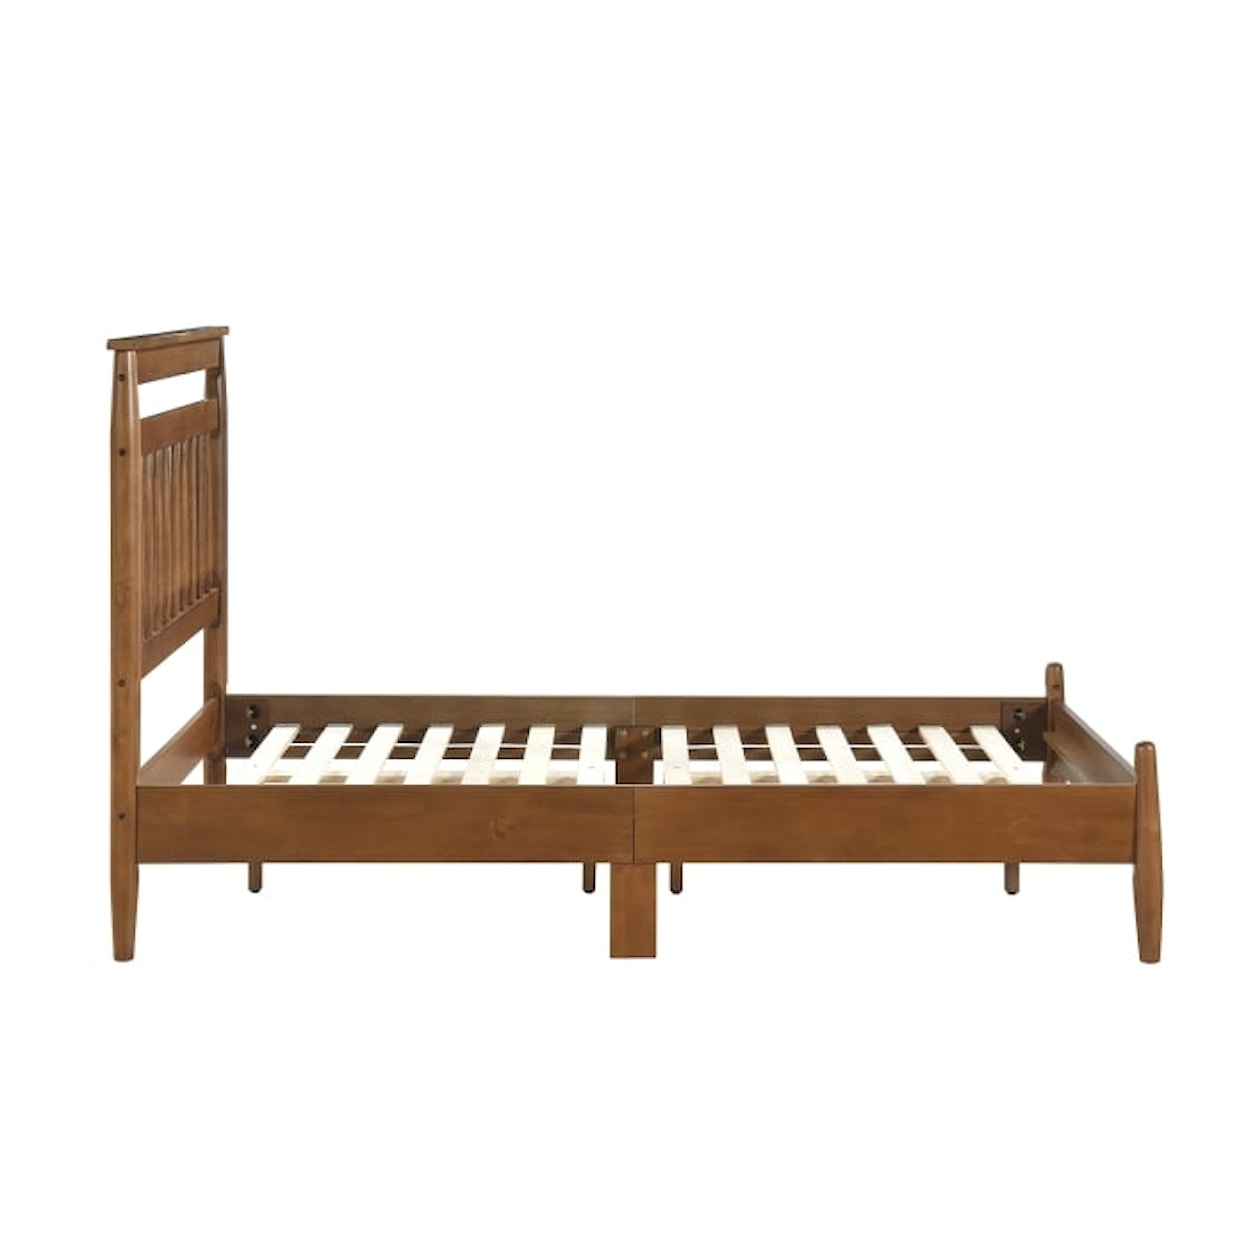 Homelegance Furniture Miscellaneous Twin Bed